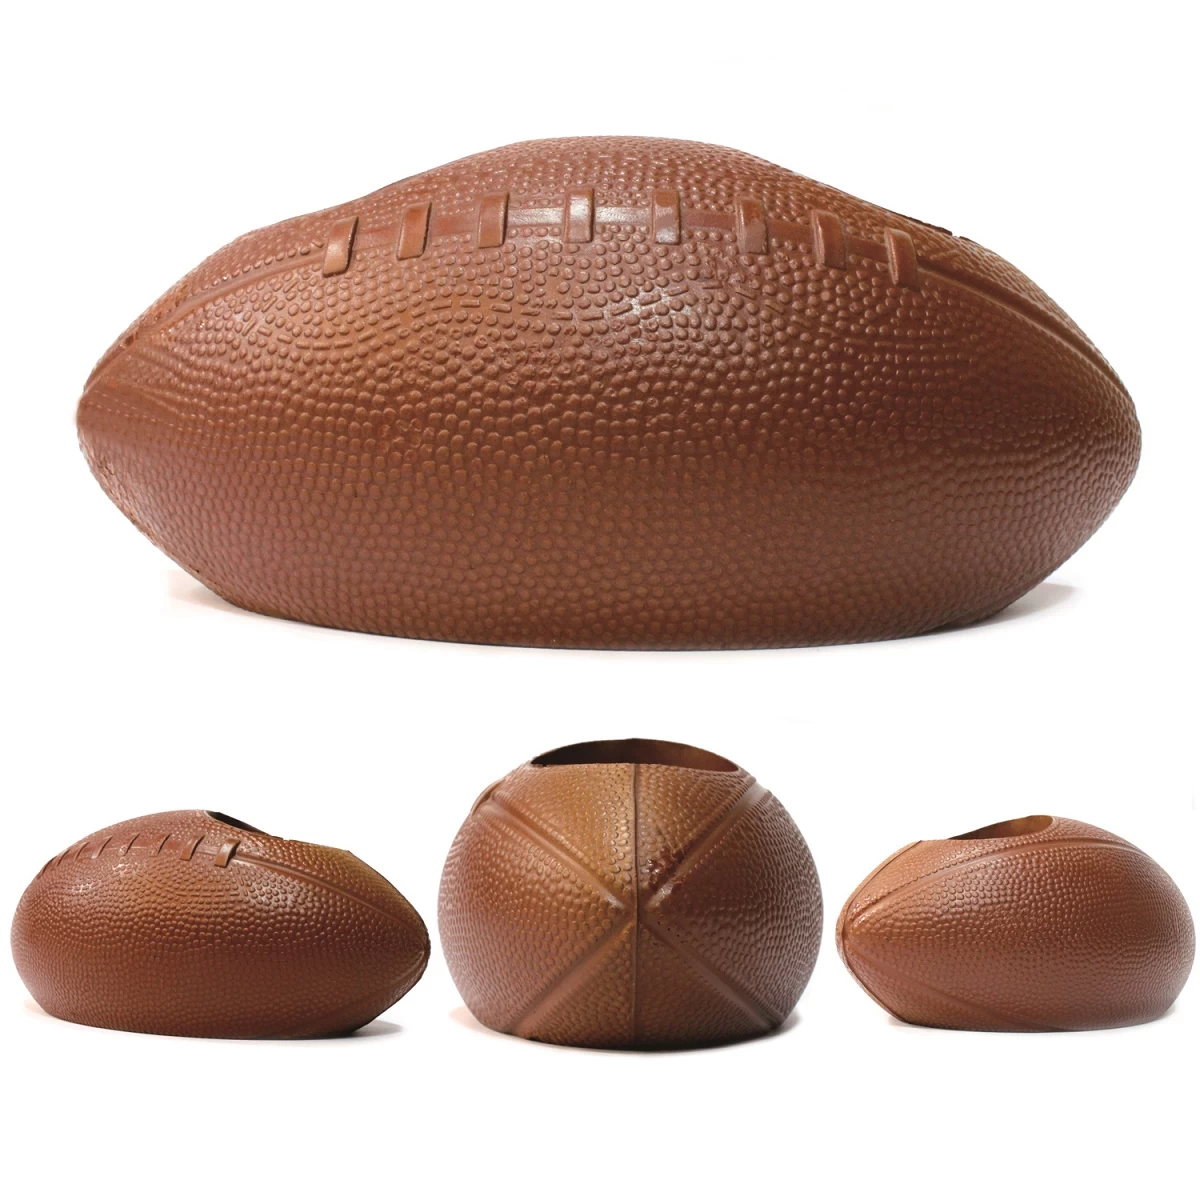 Chine whole sale foam rugby ball,customizable children adult play toys,PU Football article,Rugby Football fabricant